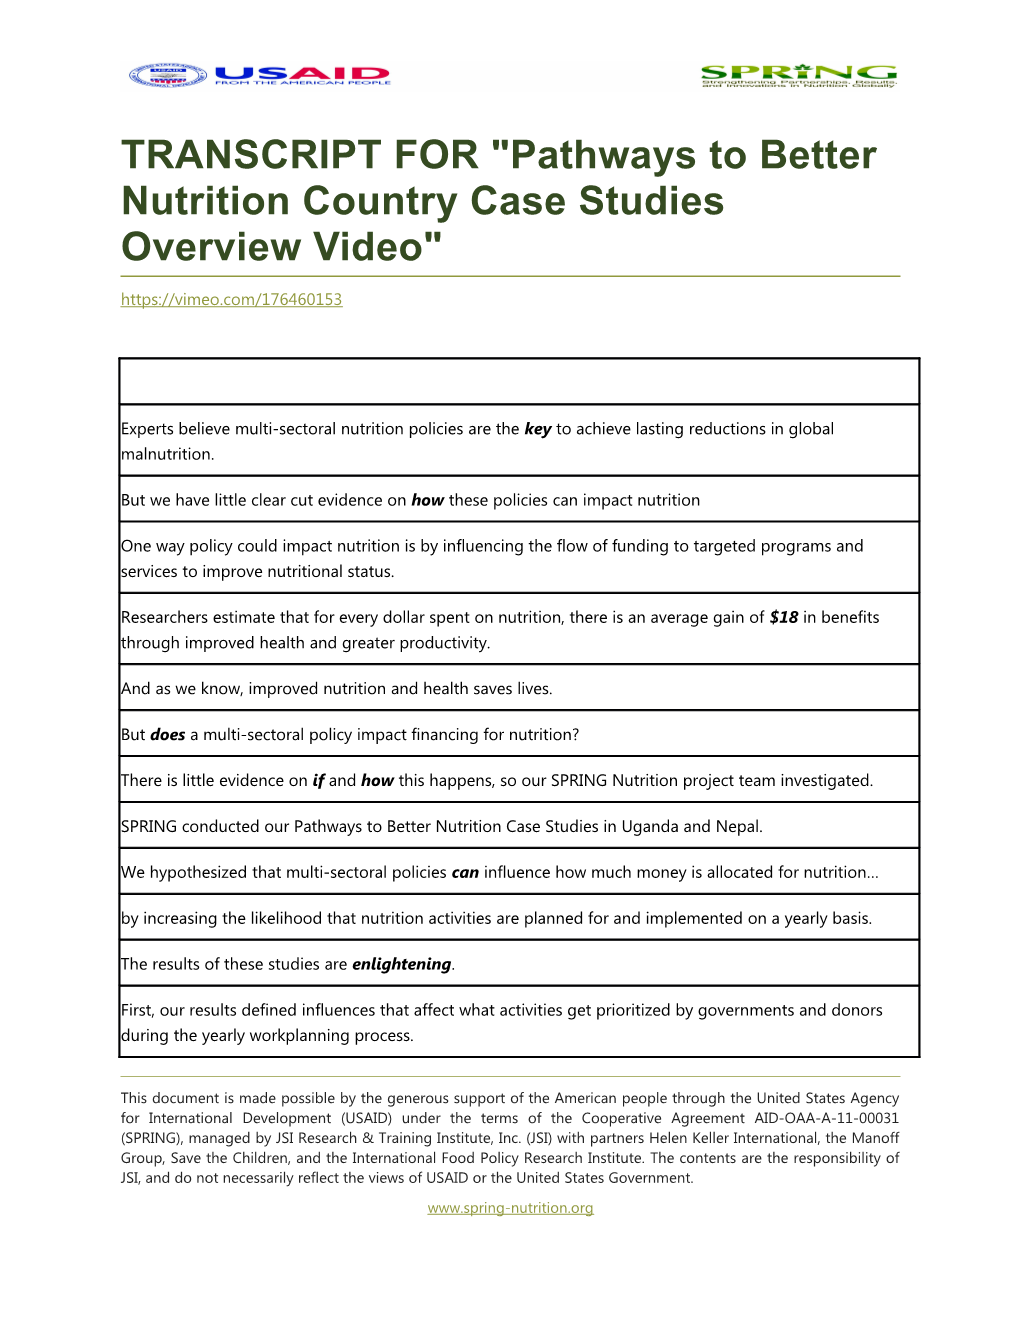 TRANSCRIPT for Pathways to Better Nutrition Country Case Studies Overview Video